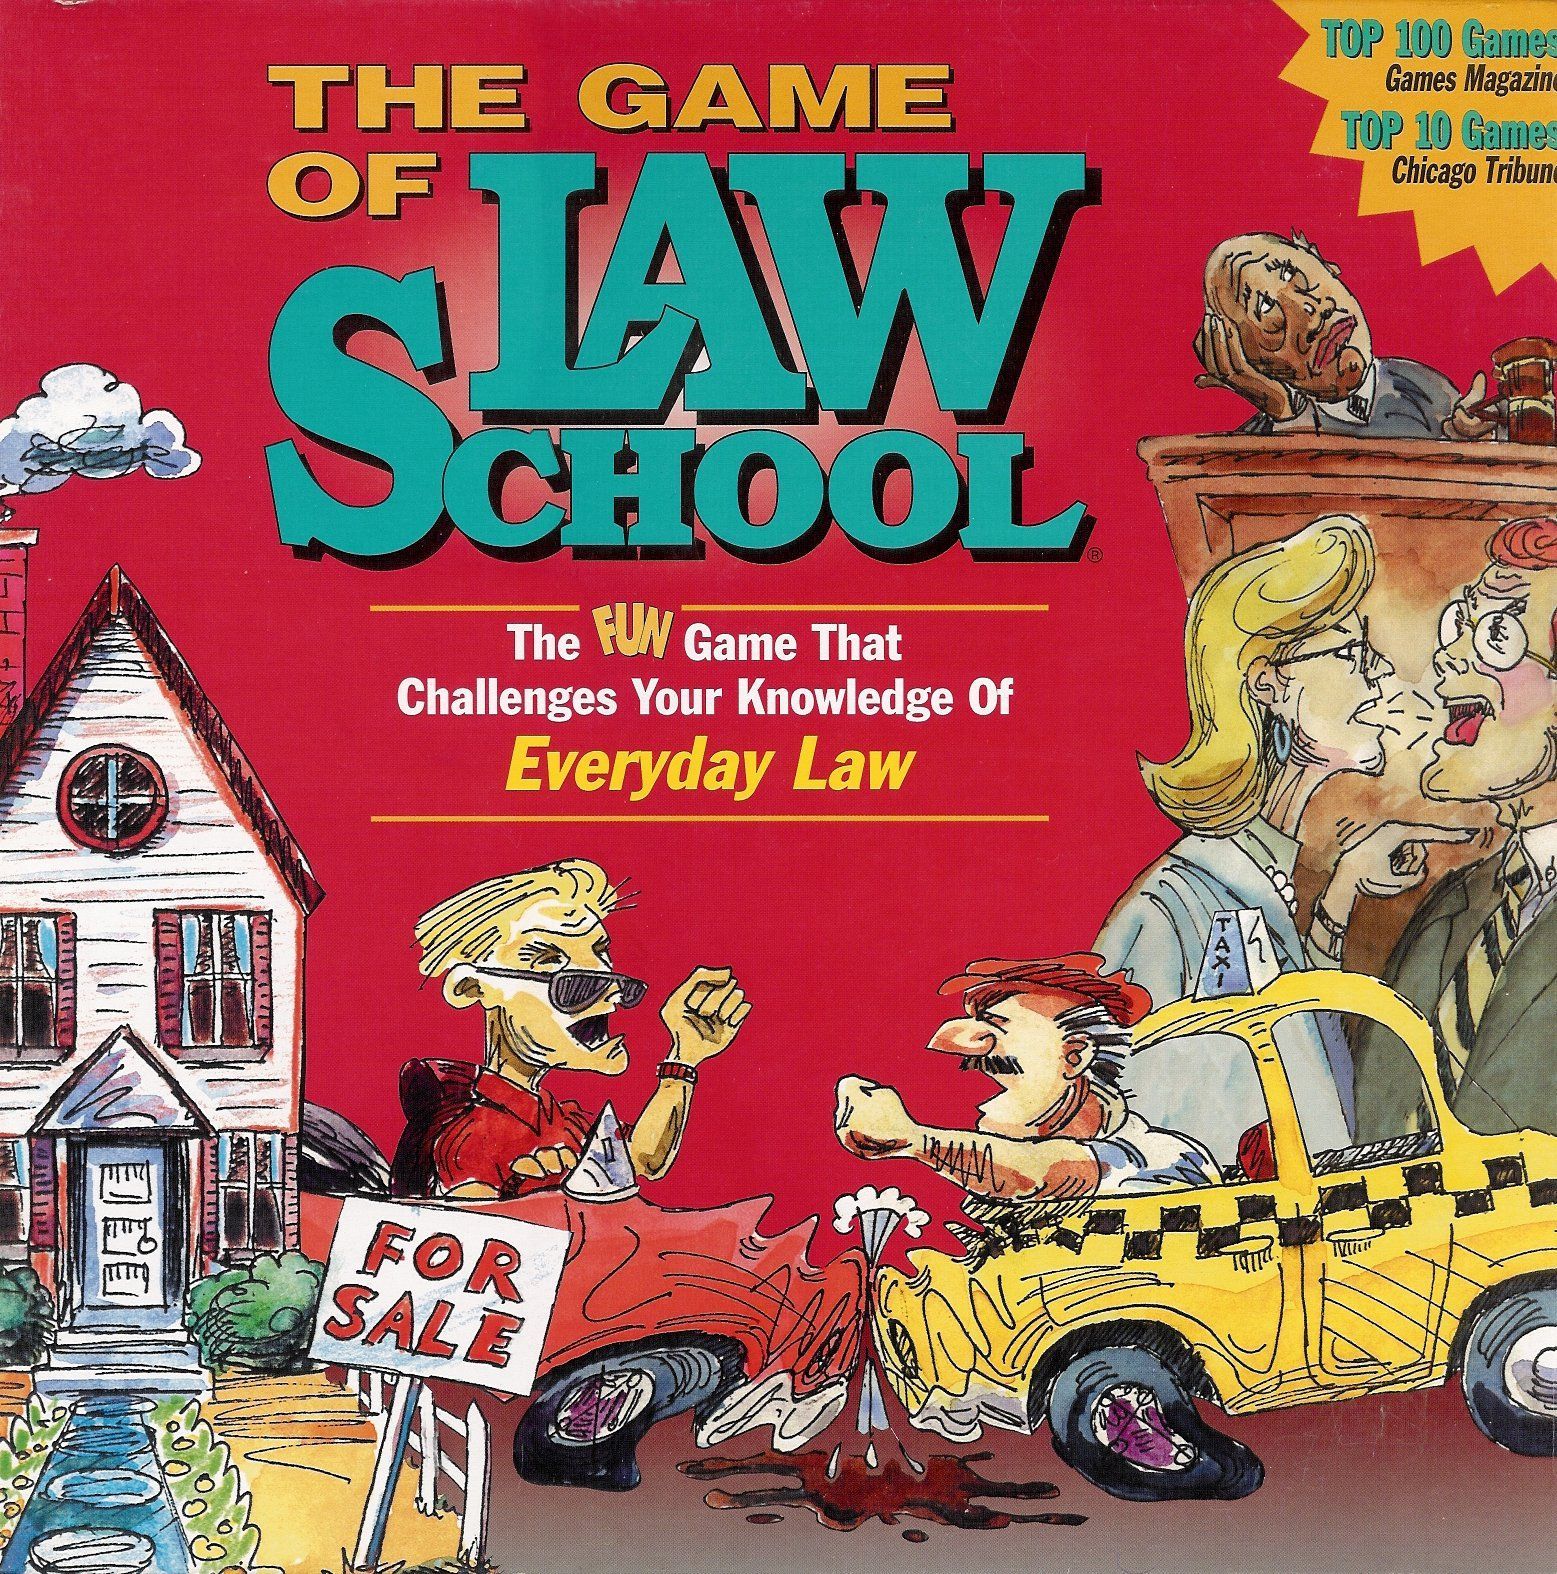 The Game of Law School